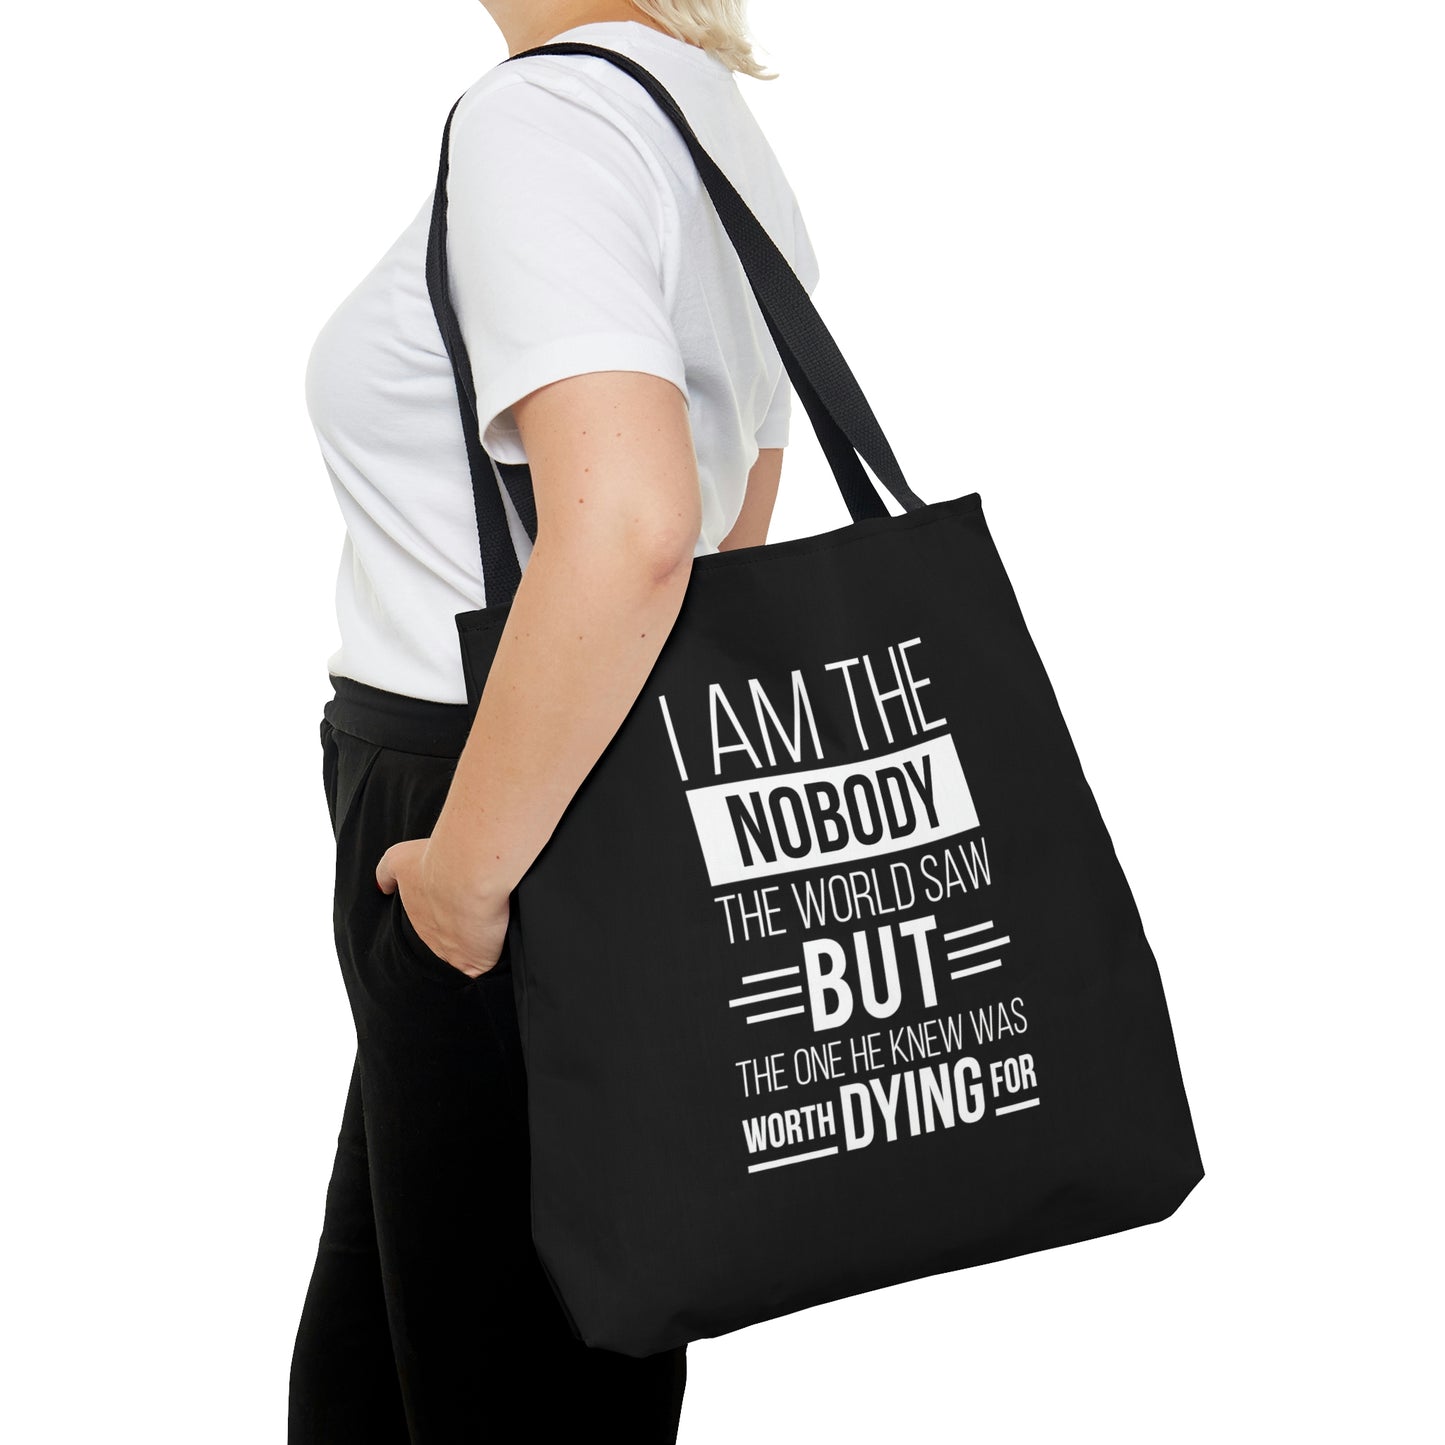 I Am The Nobody The World Saw But The One He Thought Worth Dying For Tote Bag